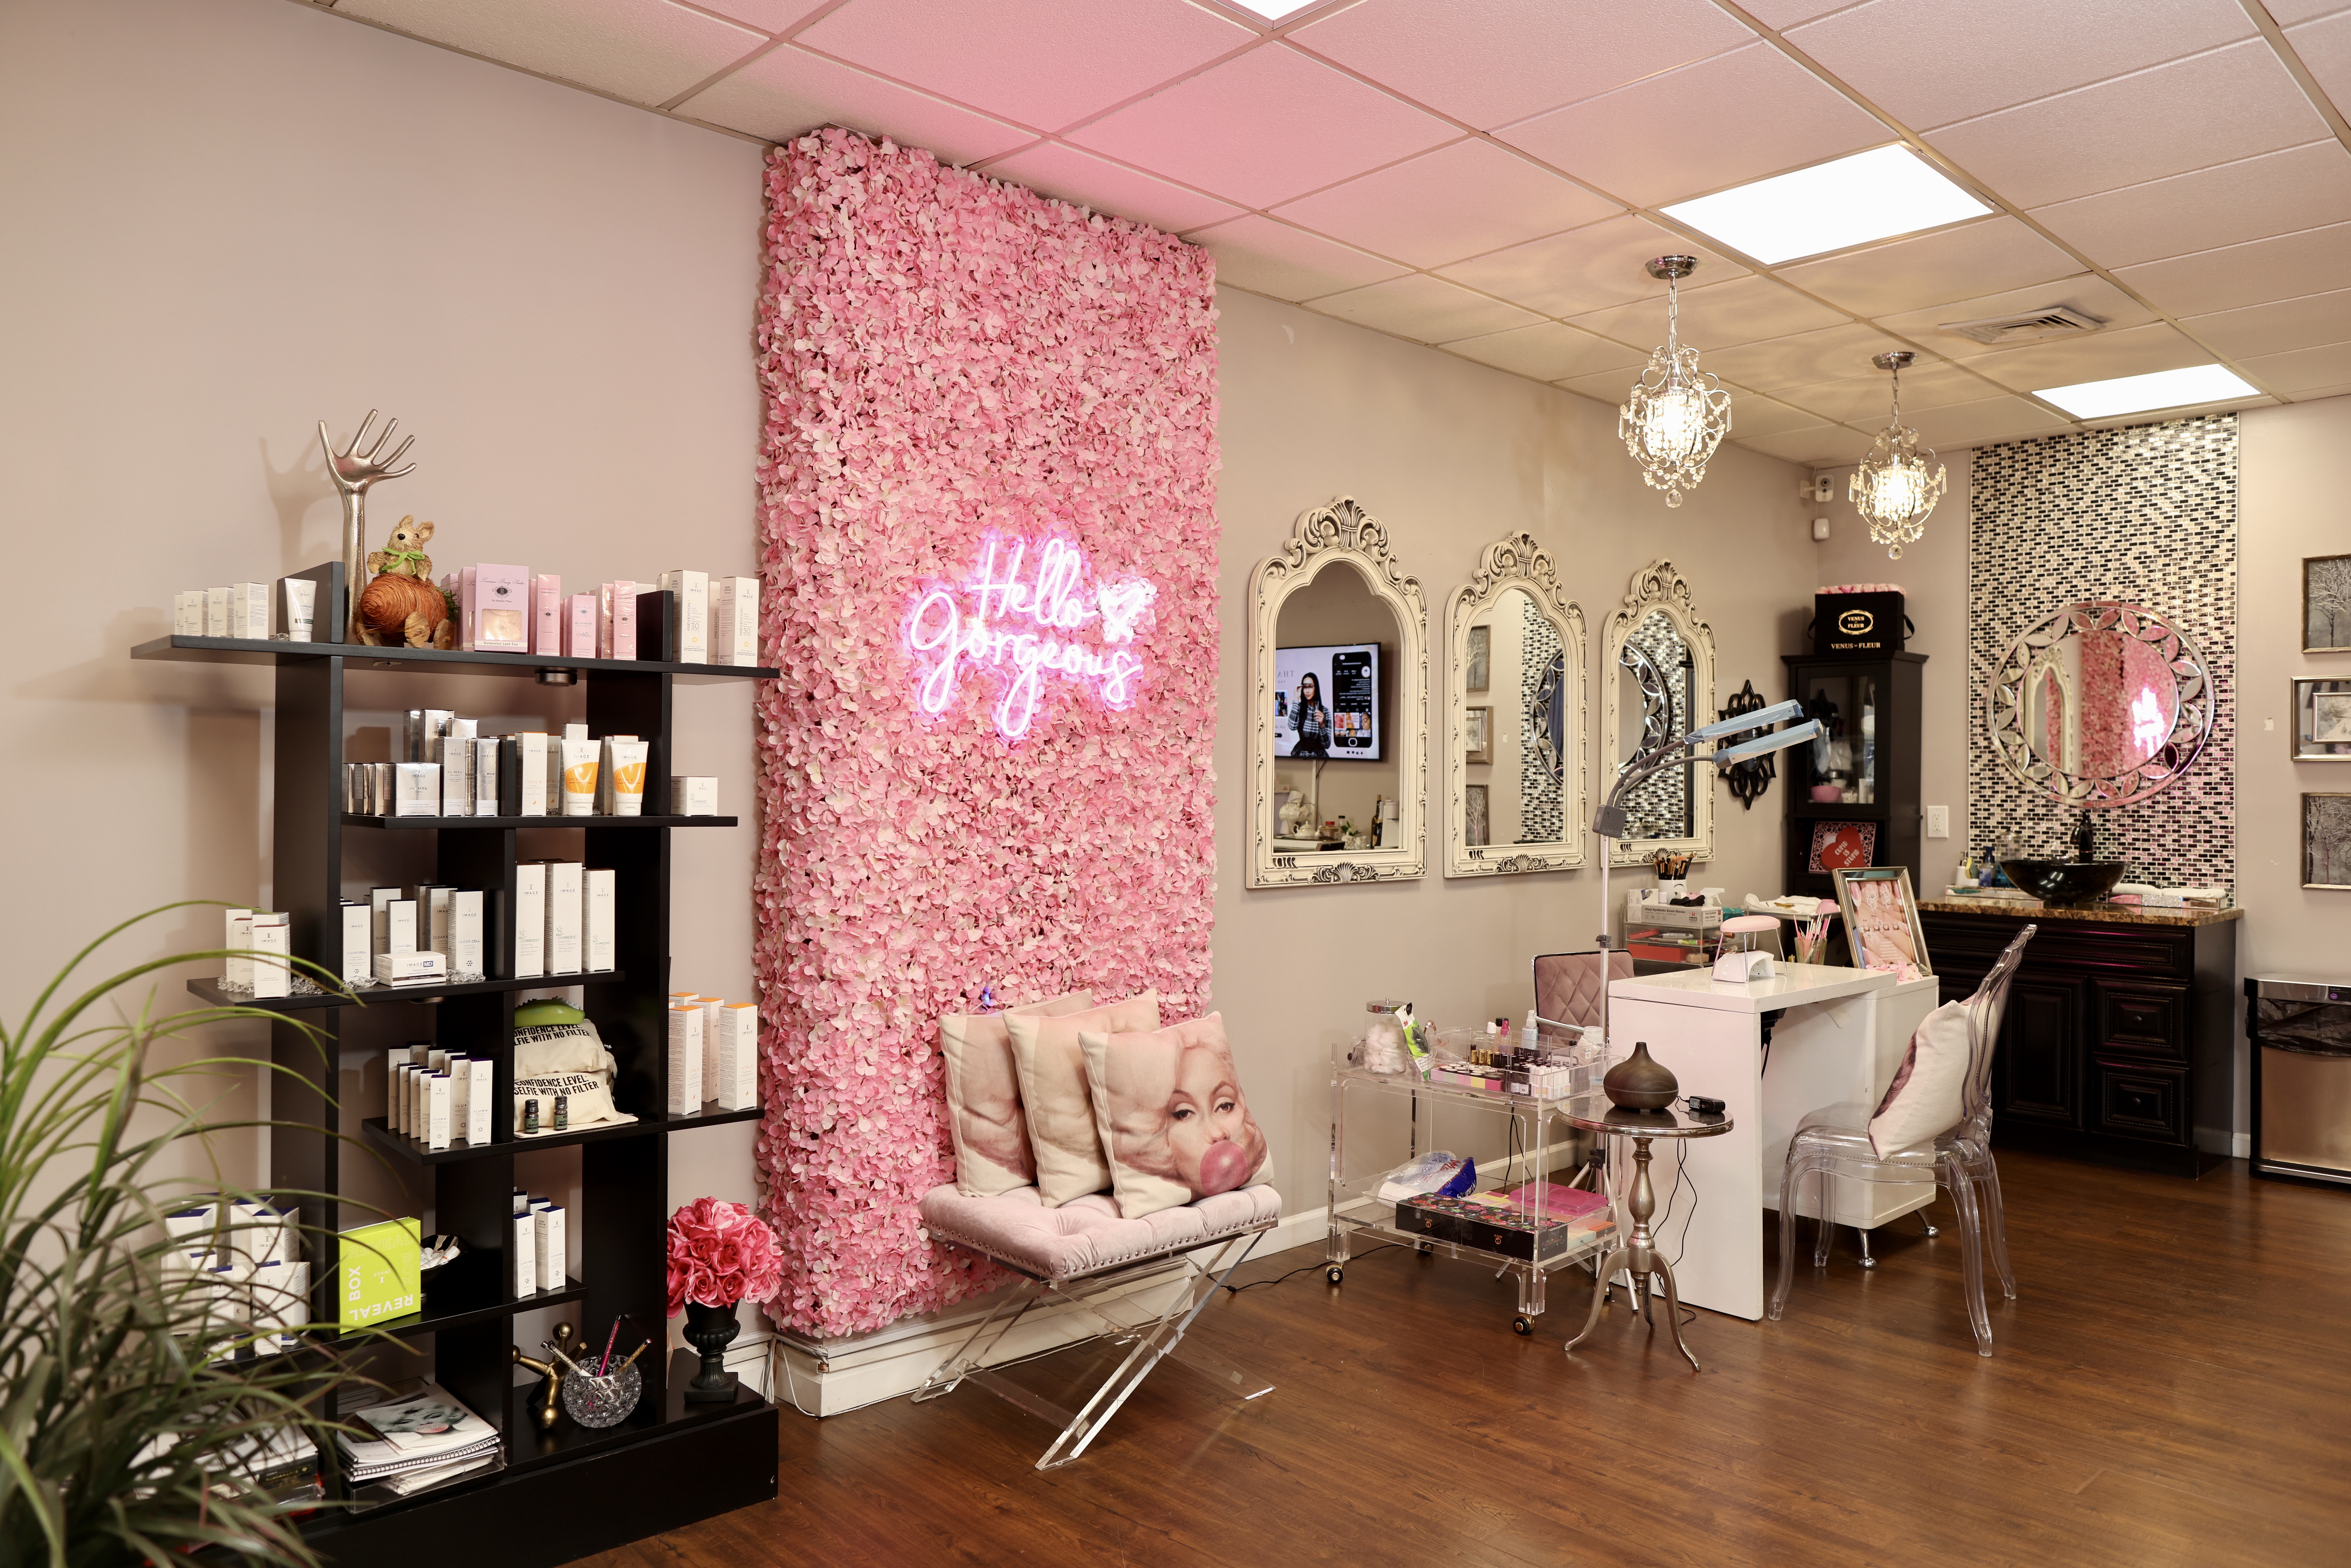 The one stop spa for eyelash extensions, Teeth whitening, eyelash extensions certification and much more. 